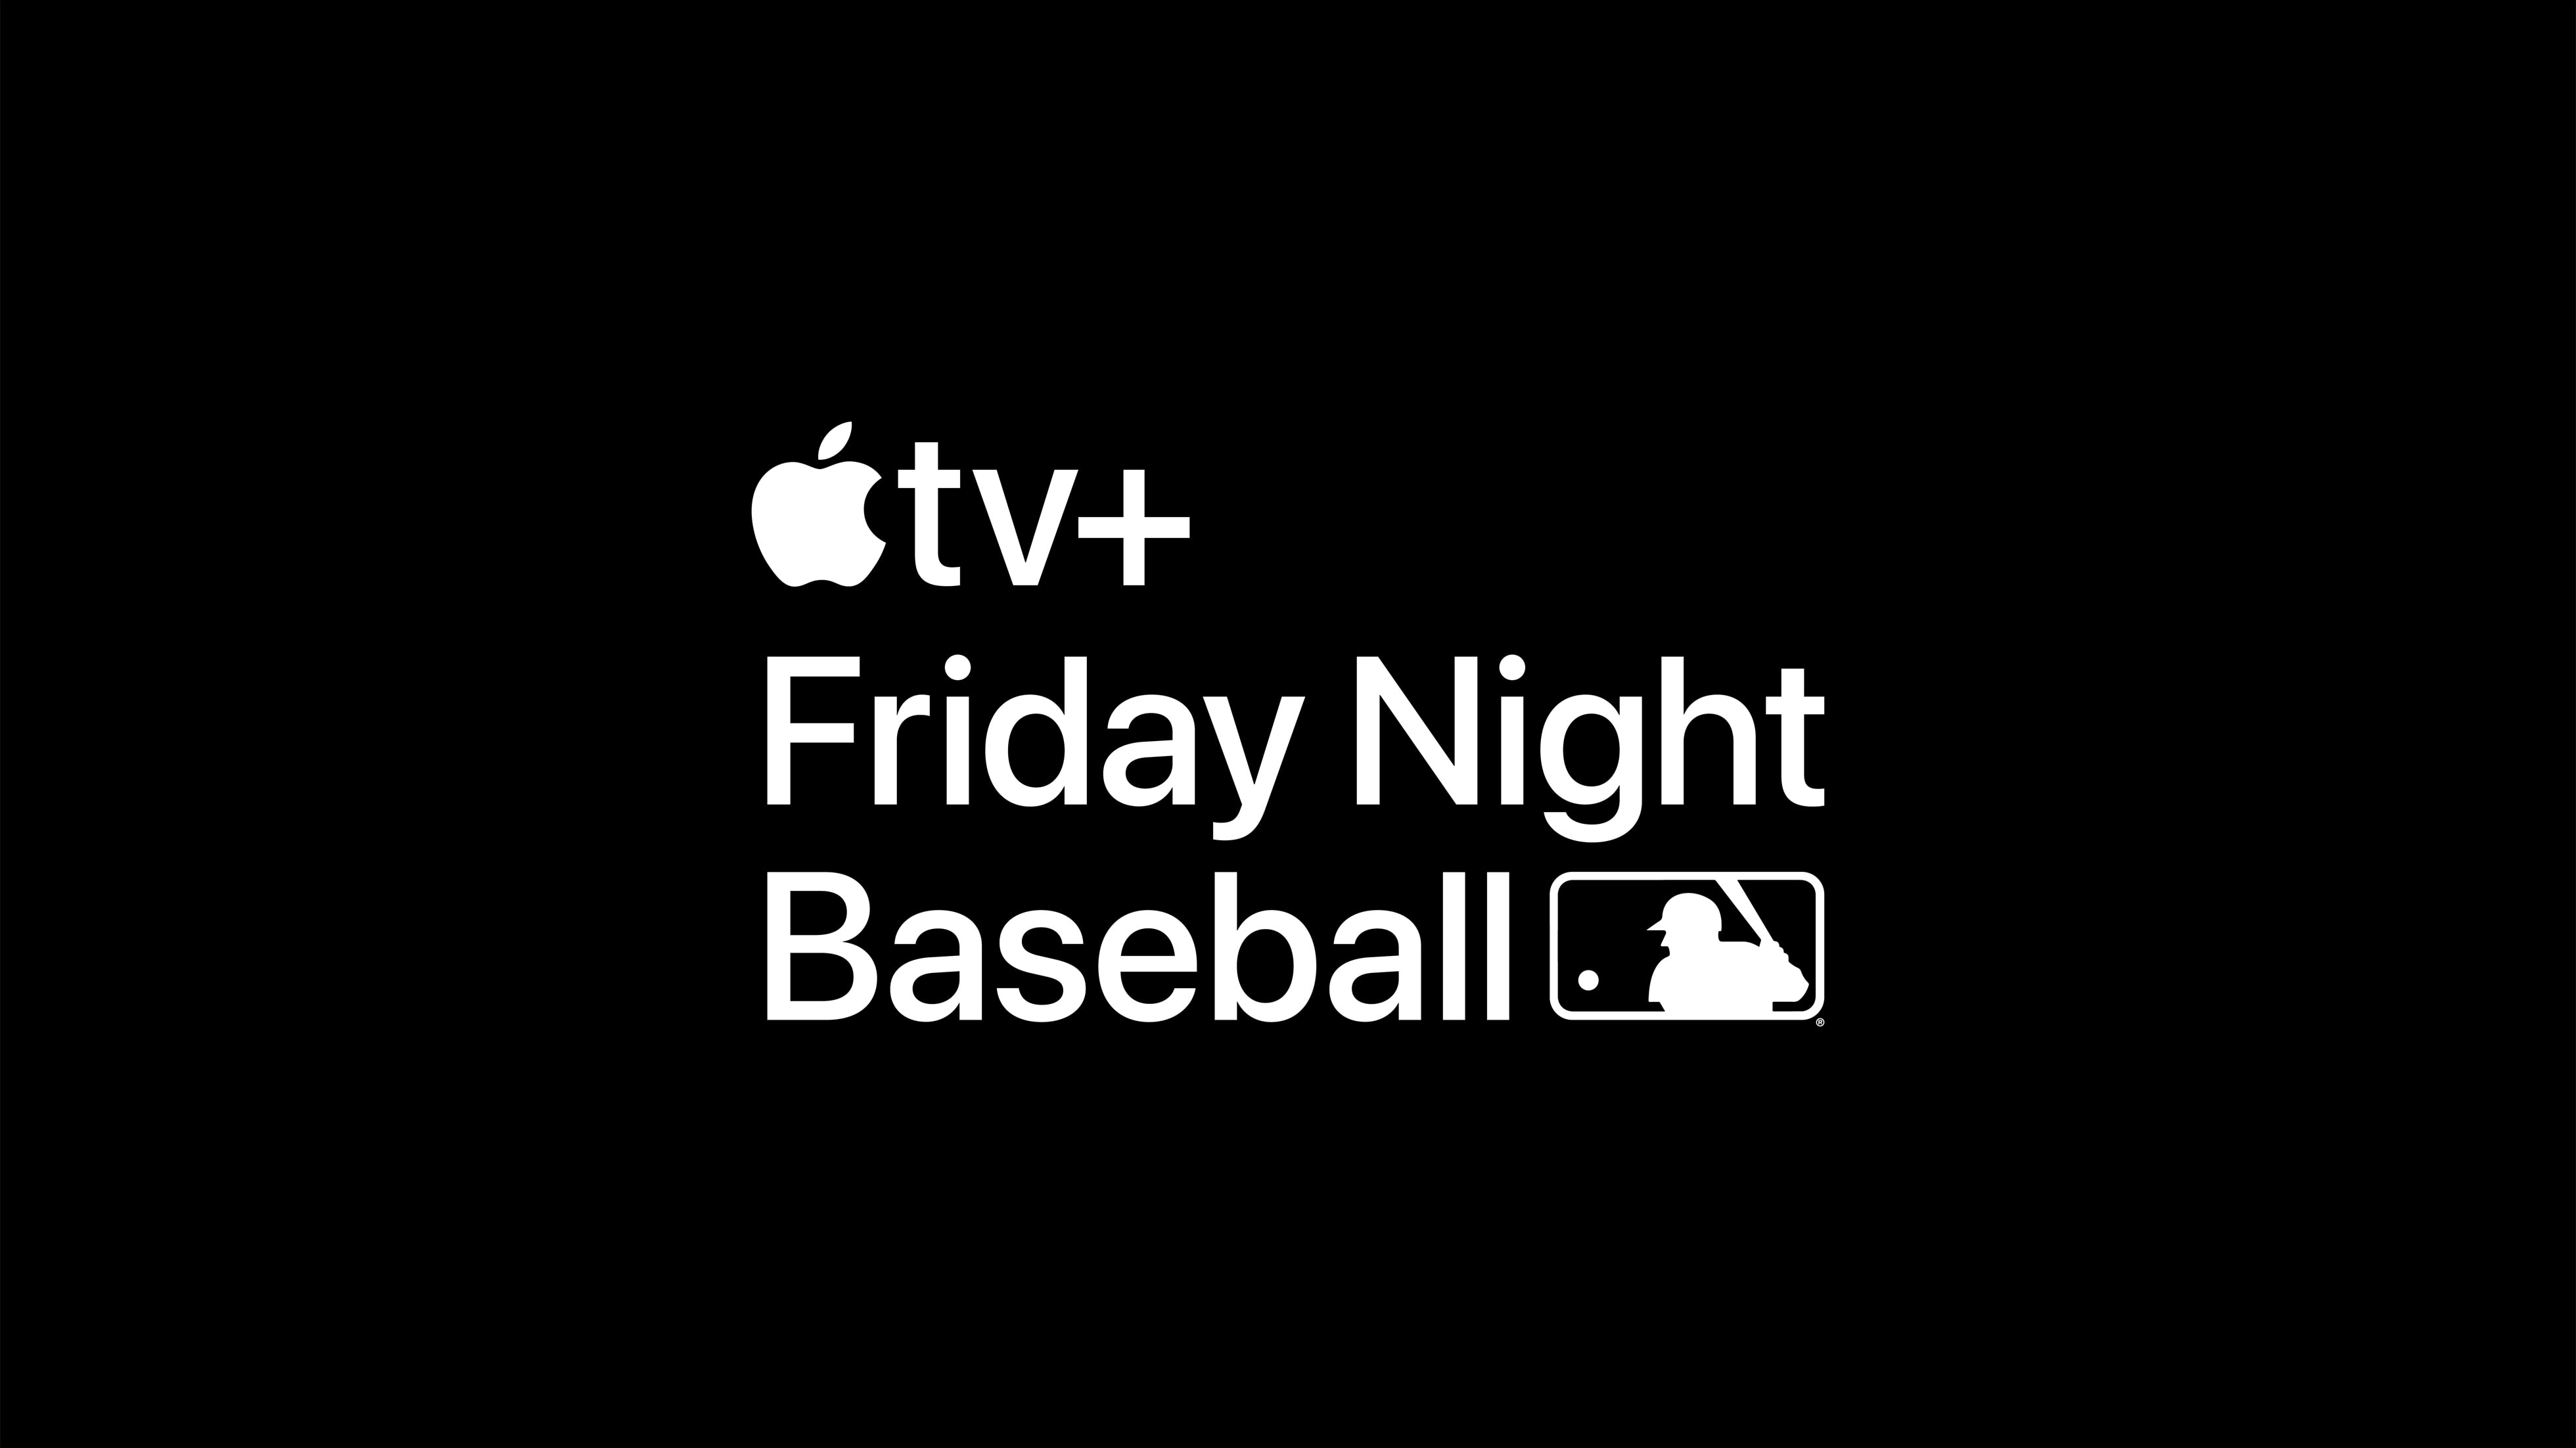 Apple and MLB announce “Friday Night Baseball” schedule beginning April 8